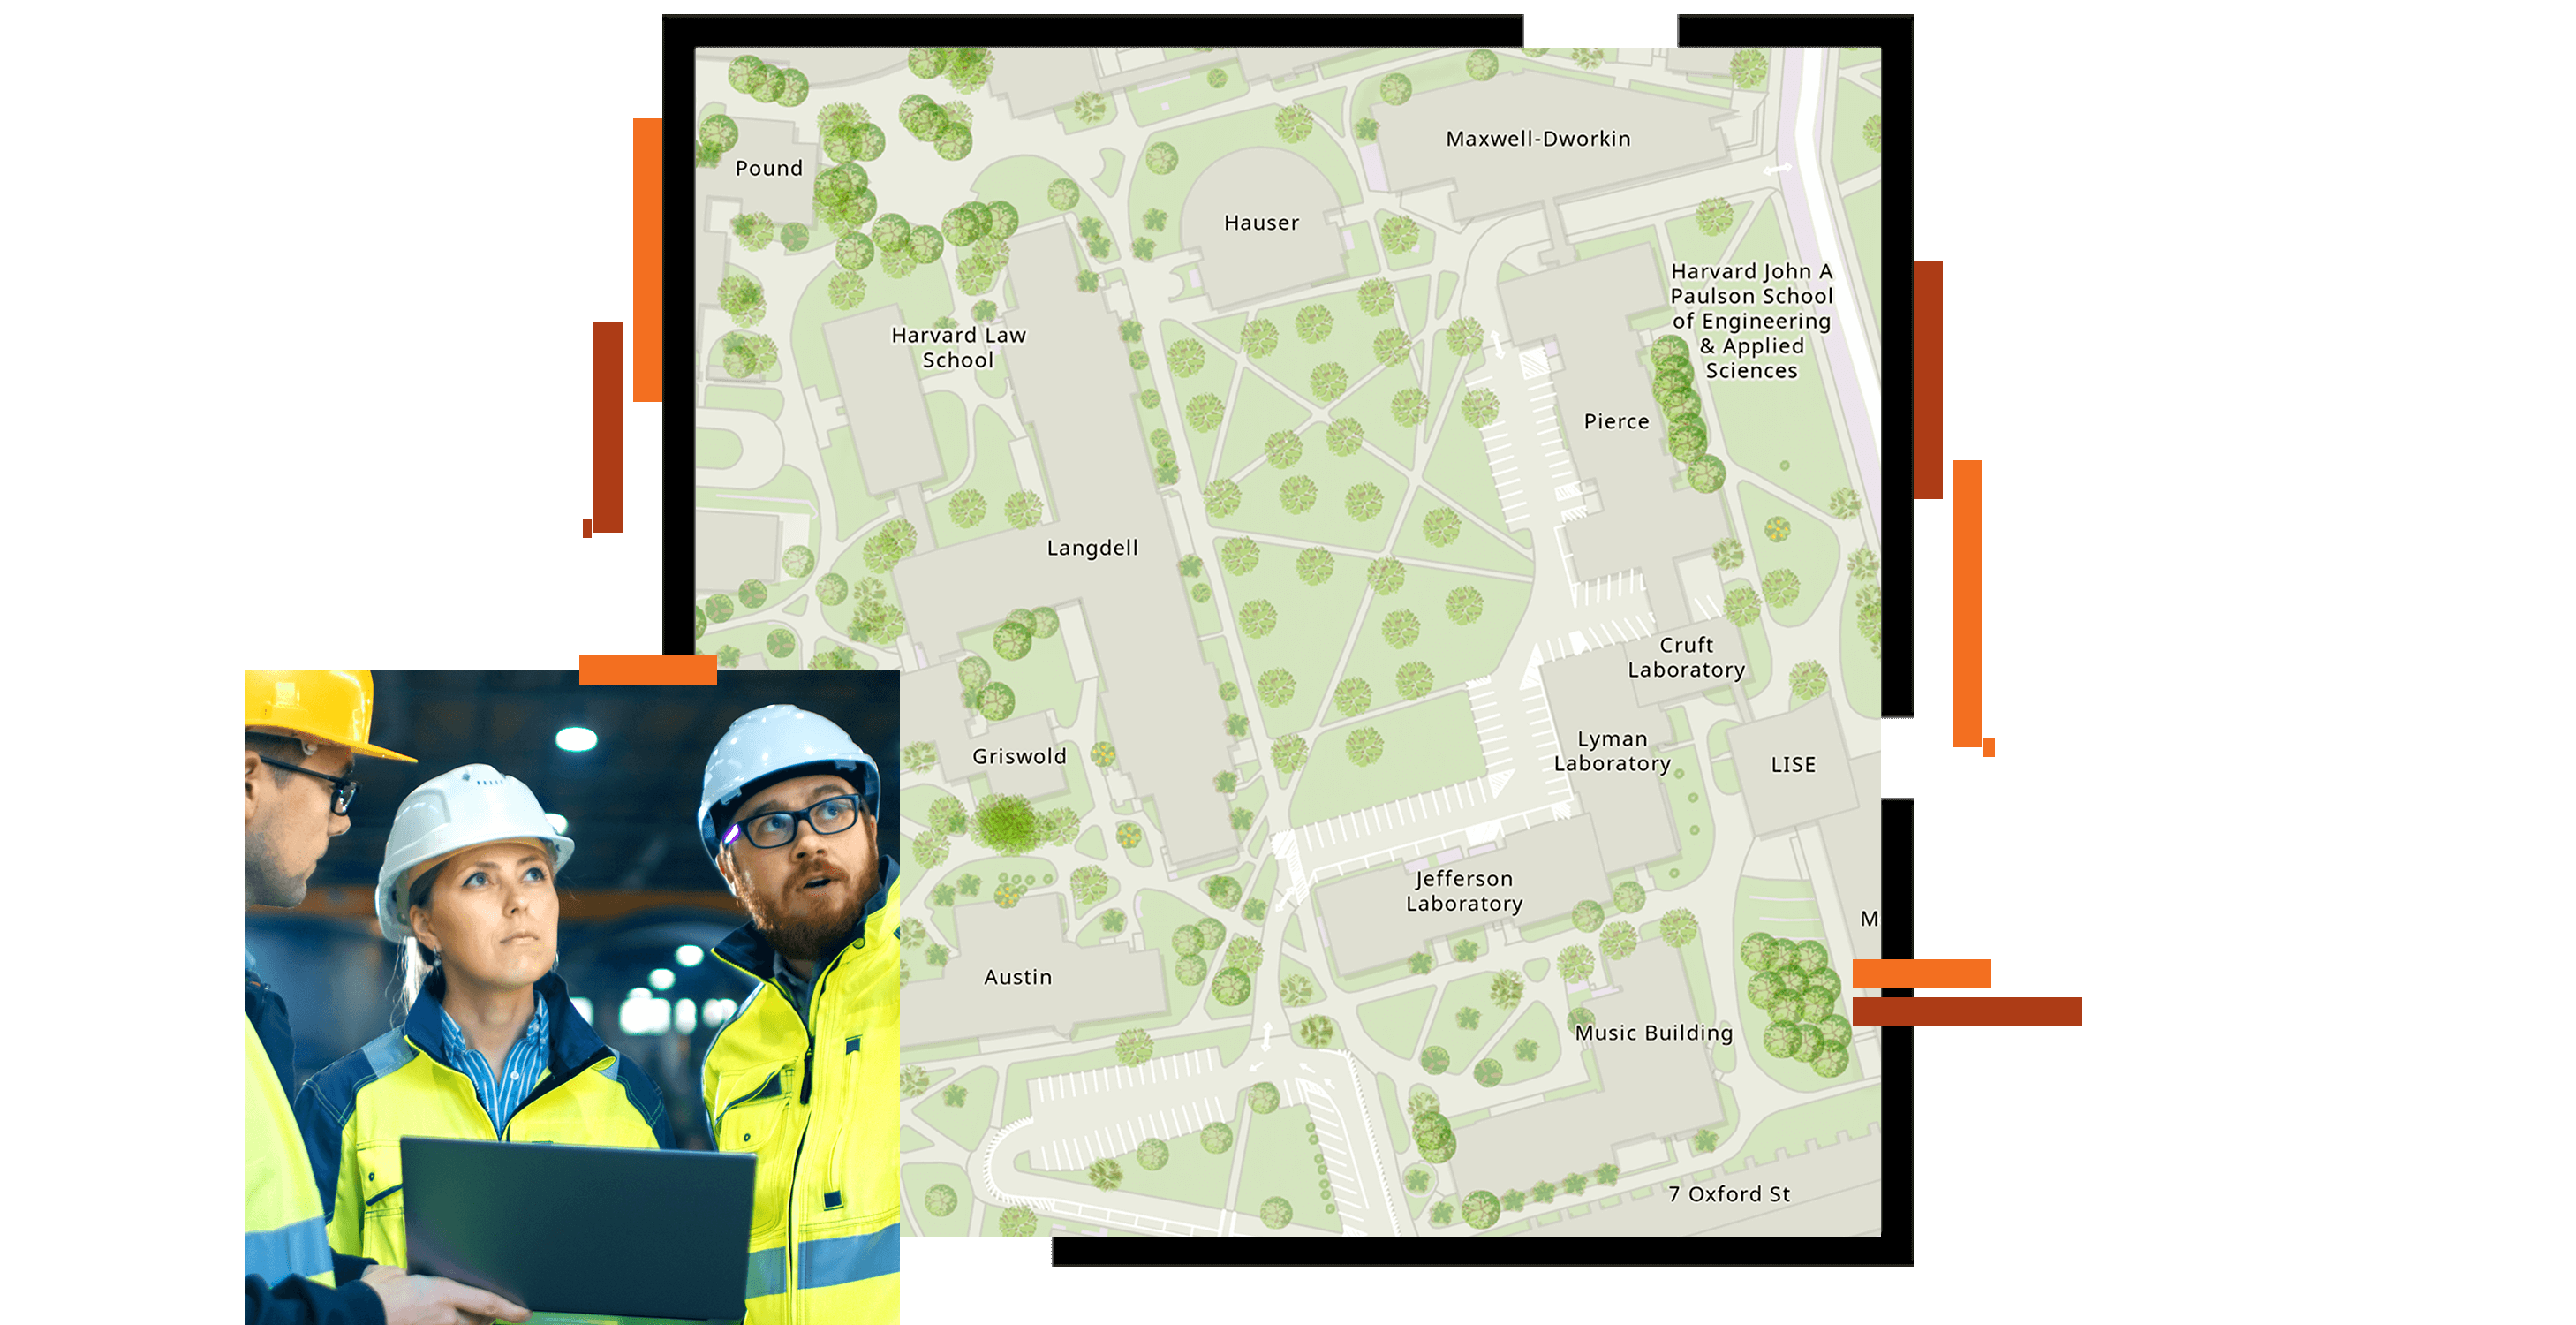 A map of a neighborhood layout overlaid with a photo of three people in hardhats and yellow vests discussing a laptop display